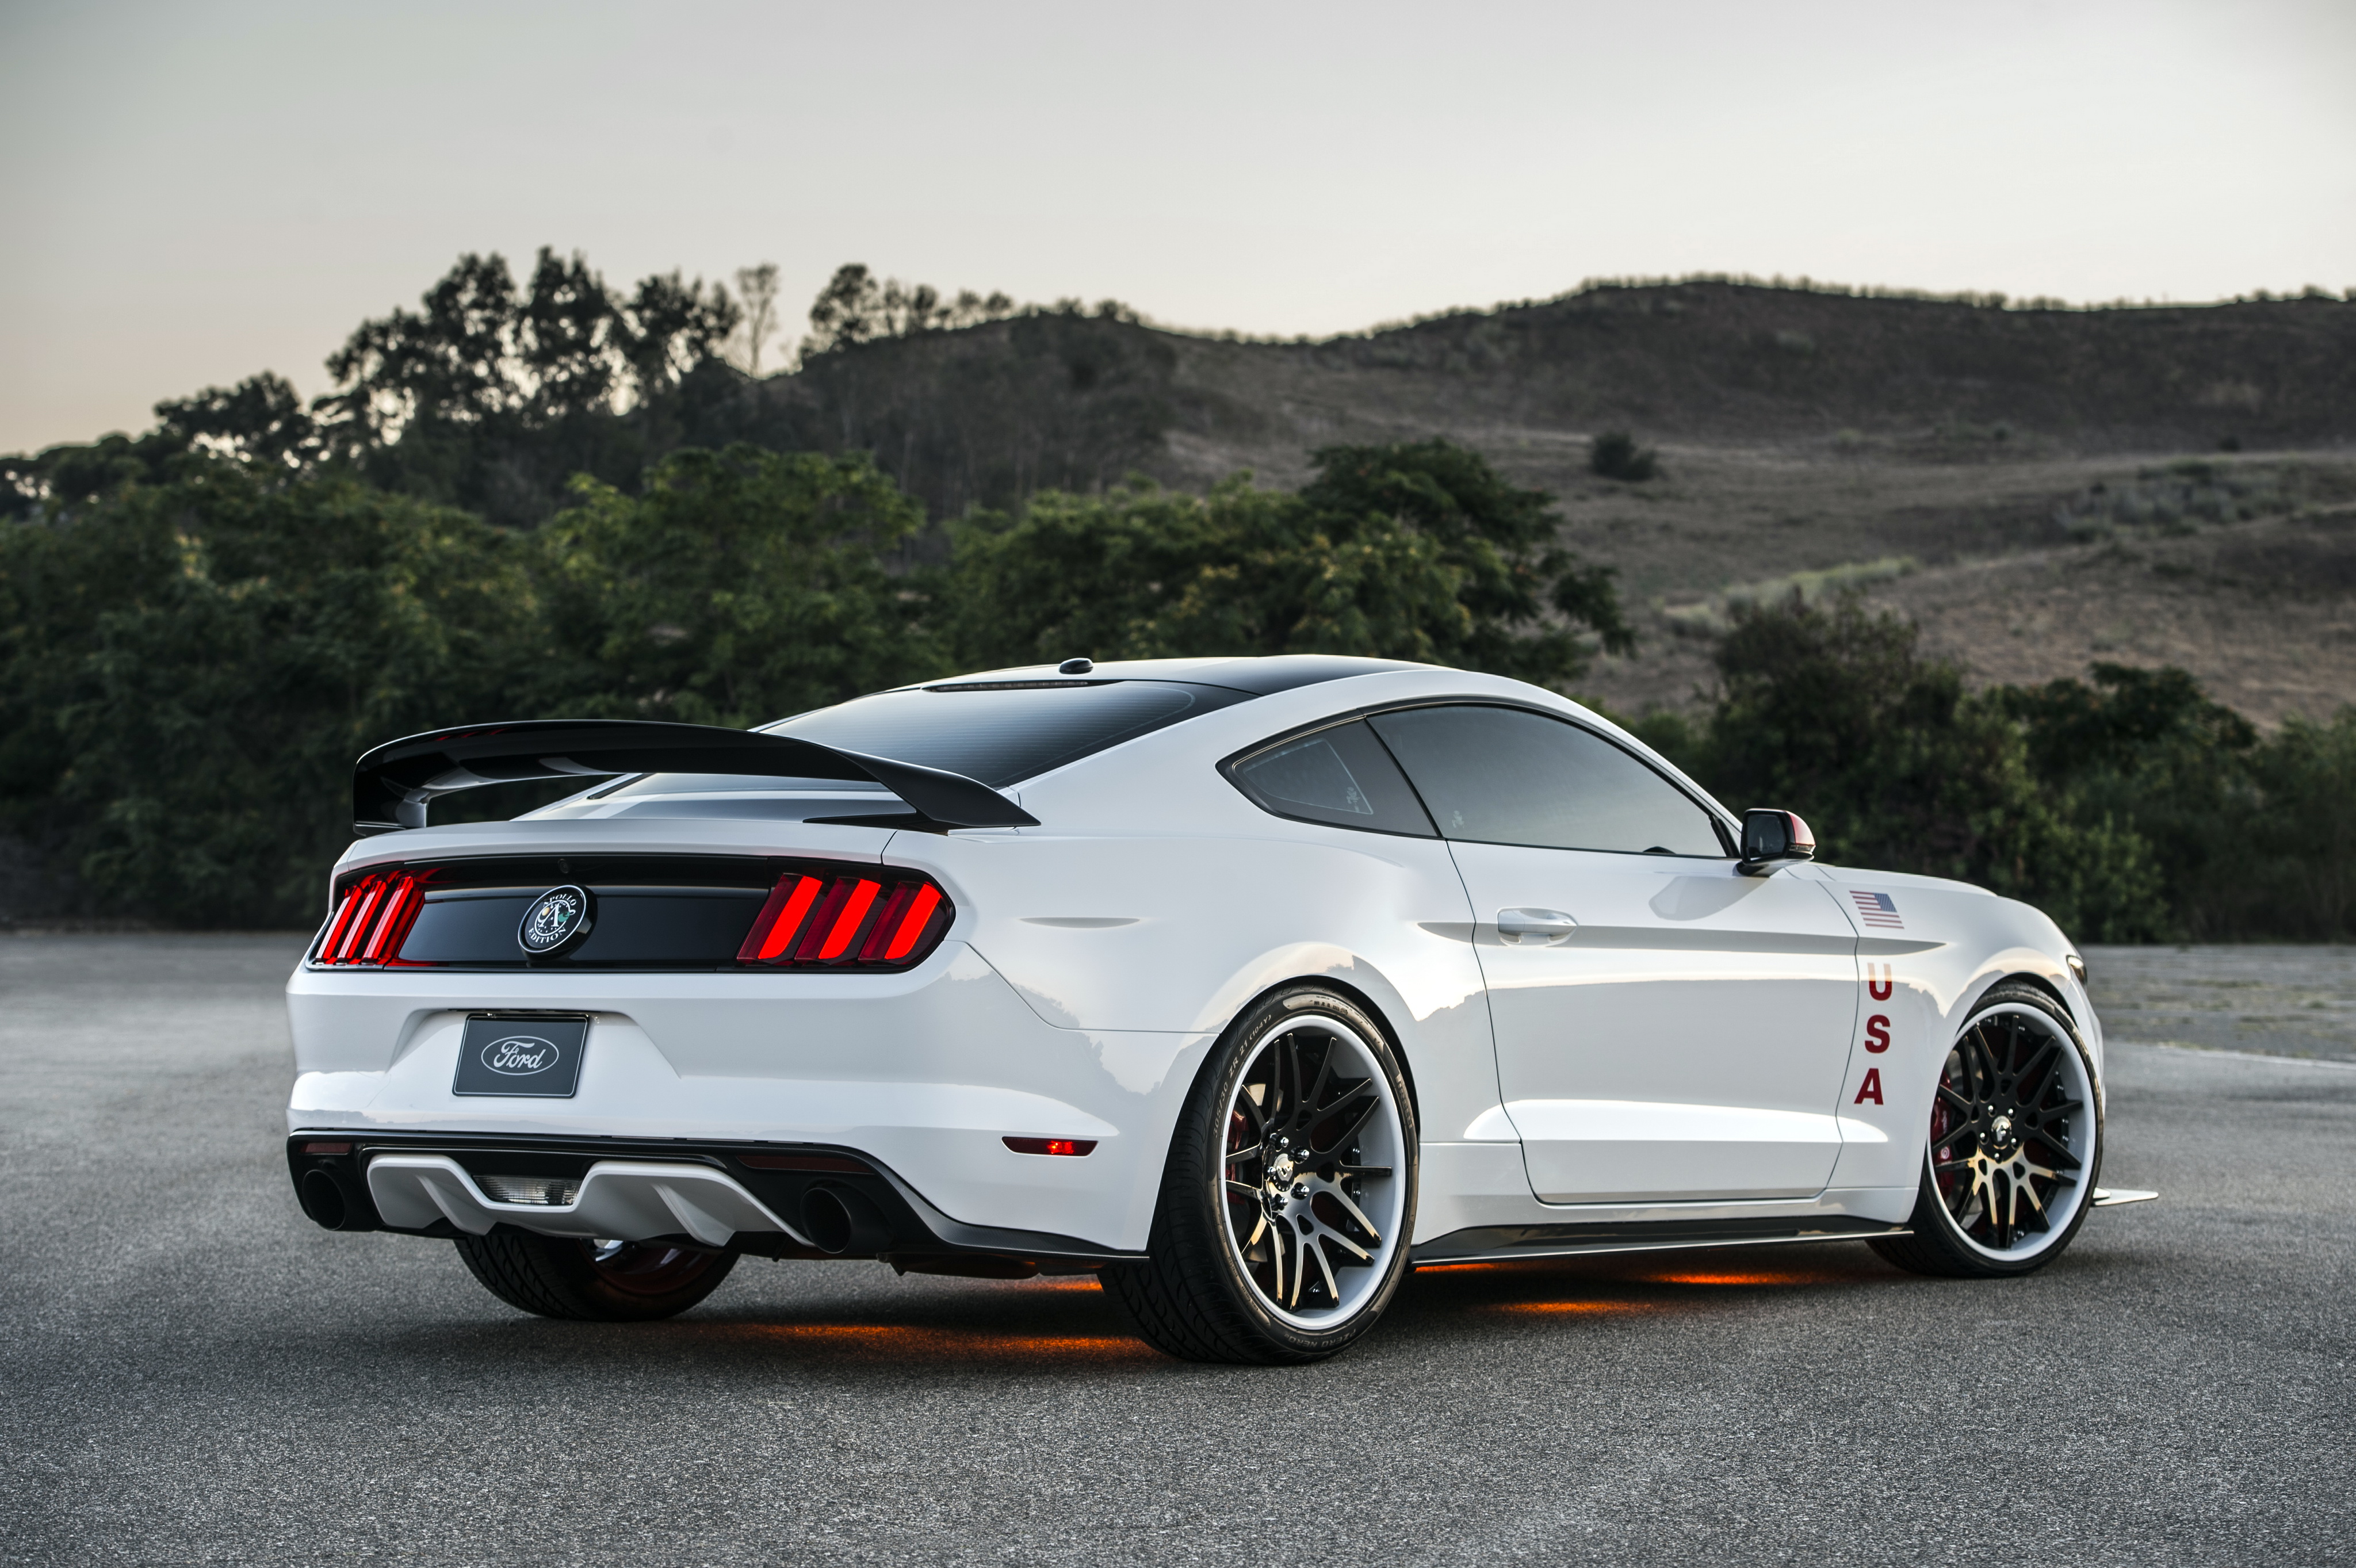 Vehicles Ford Mustang HD Wallpaper | Background Image